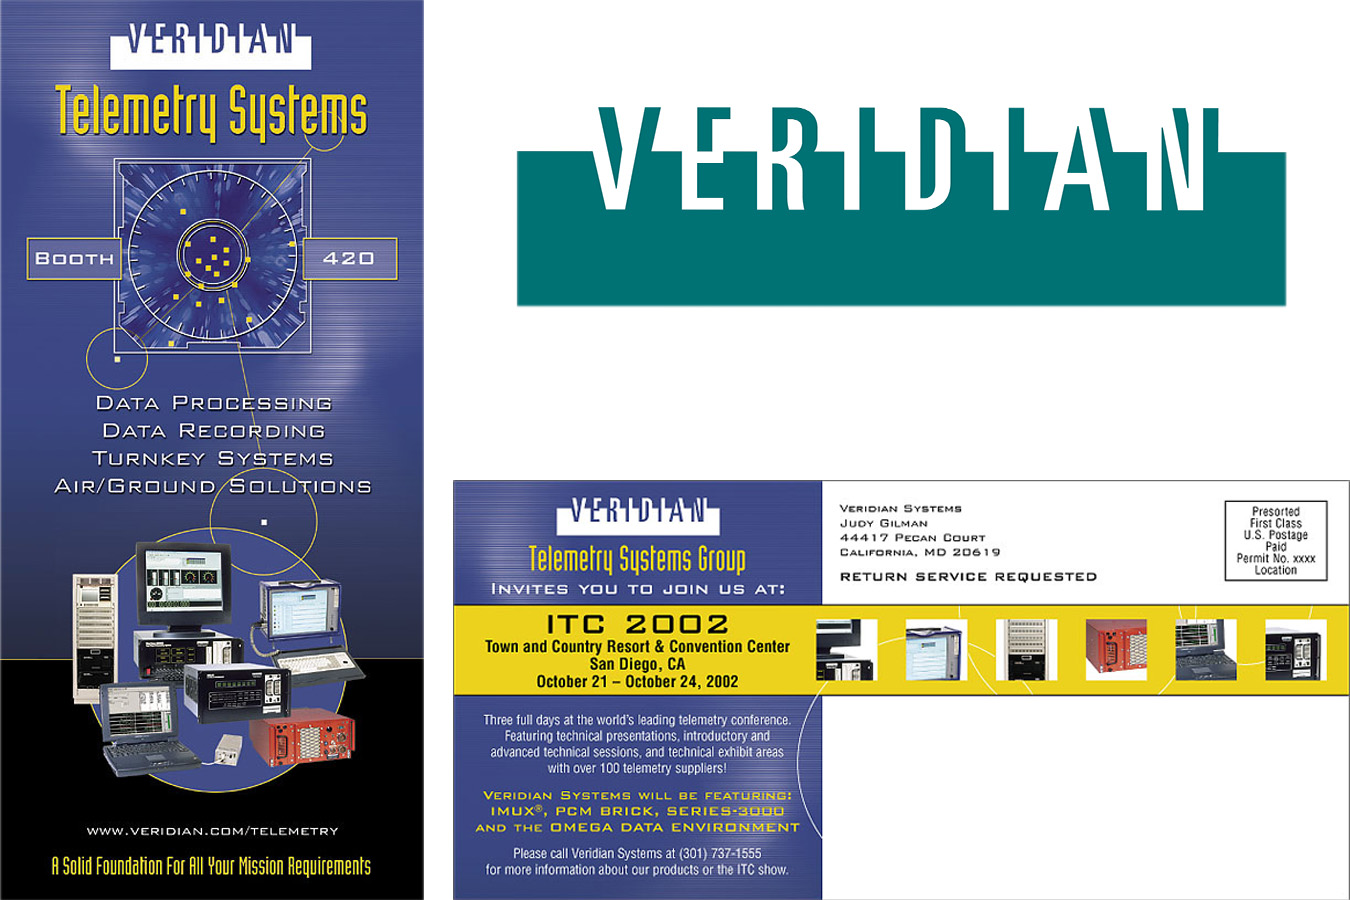 Veridian Postcard : Paris Design provided trade show and collateral services to Veridian more than 10 years